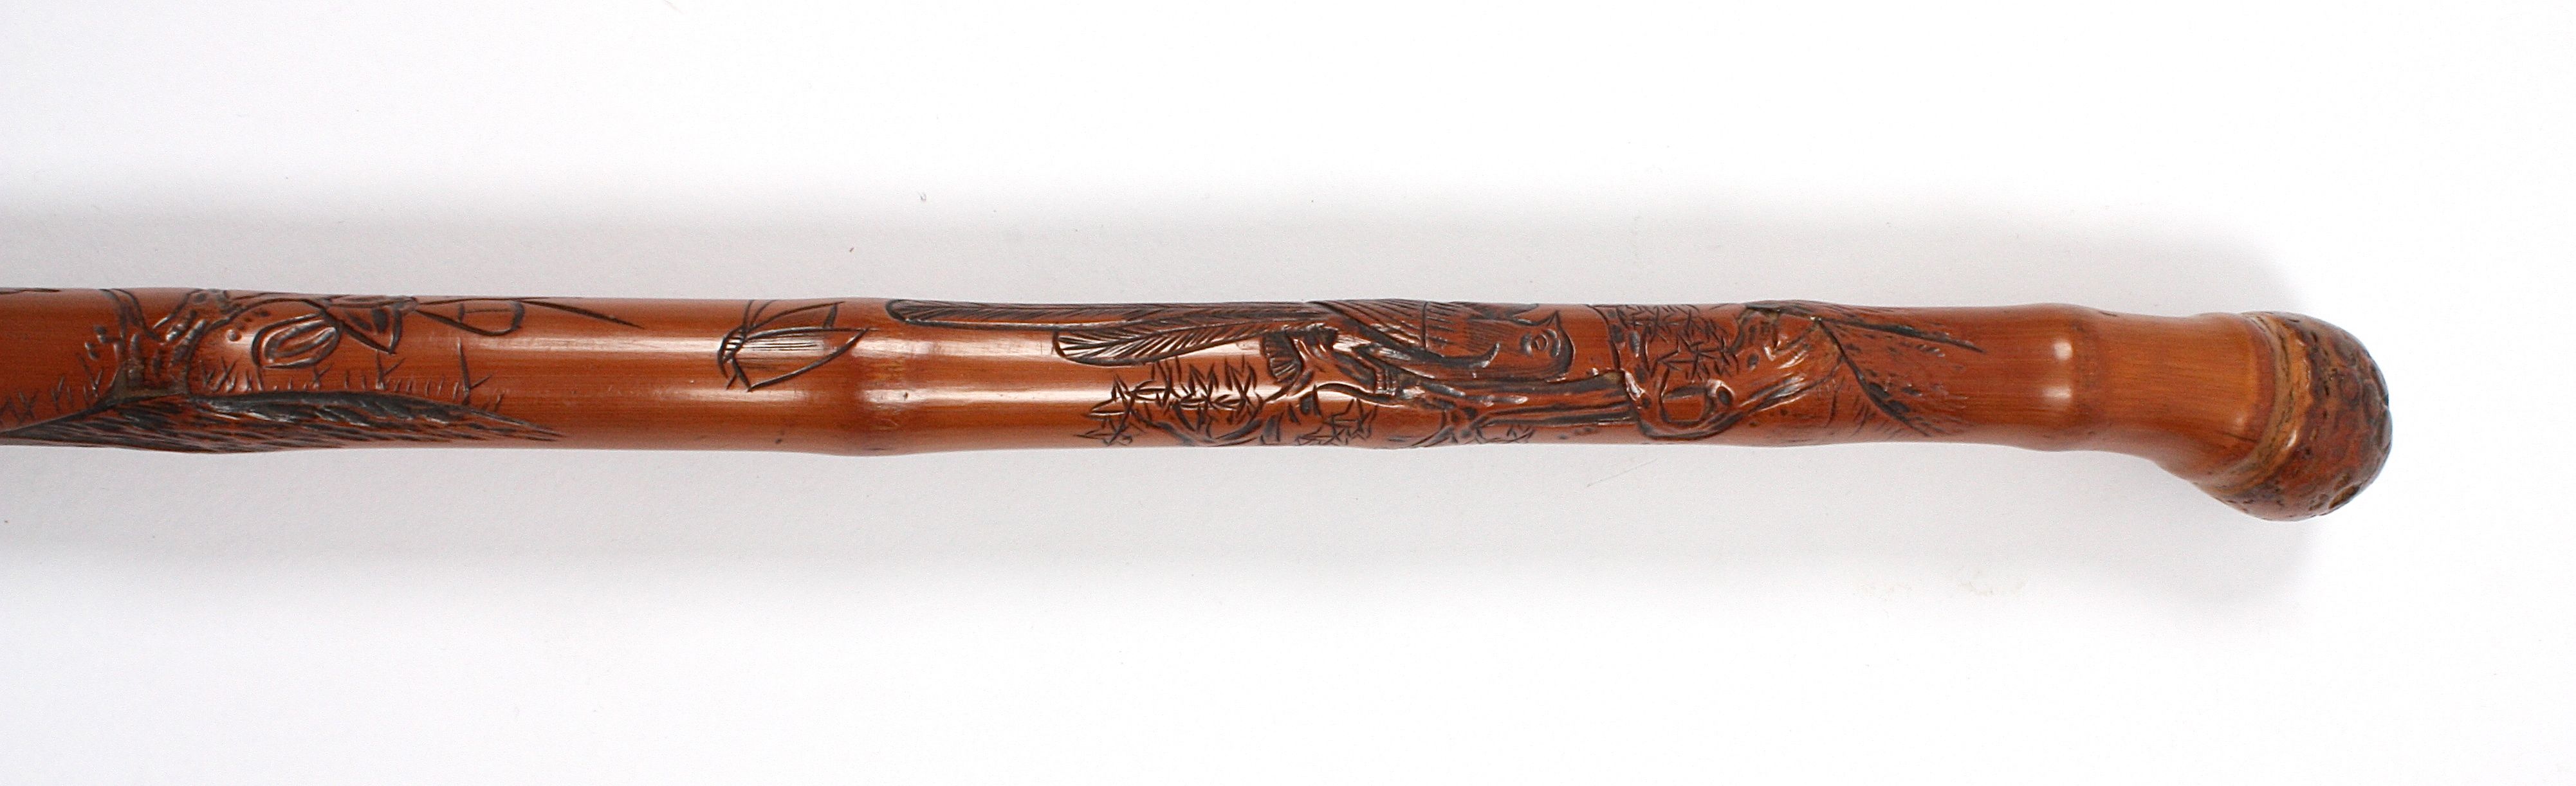 A late 19th century Japanese bamboo walking stick
carved with a scene of a boy at the foot of a - Image 3 of 3